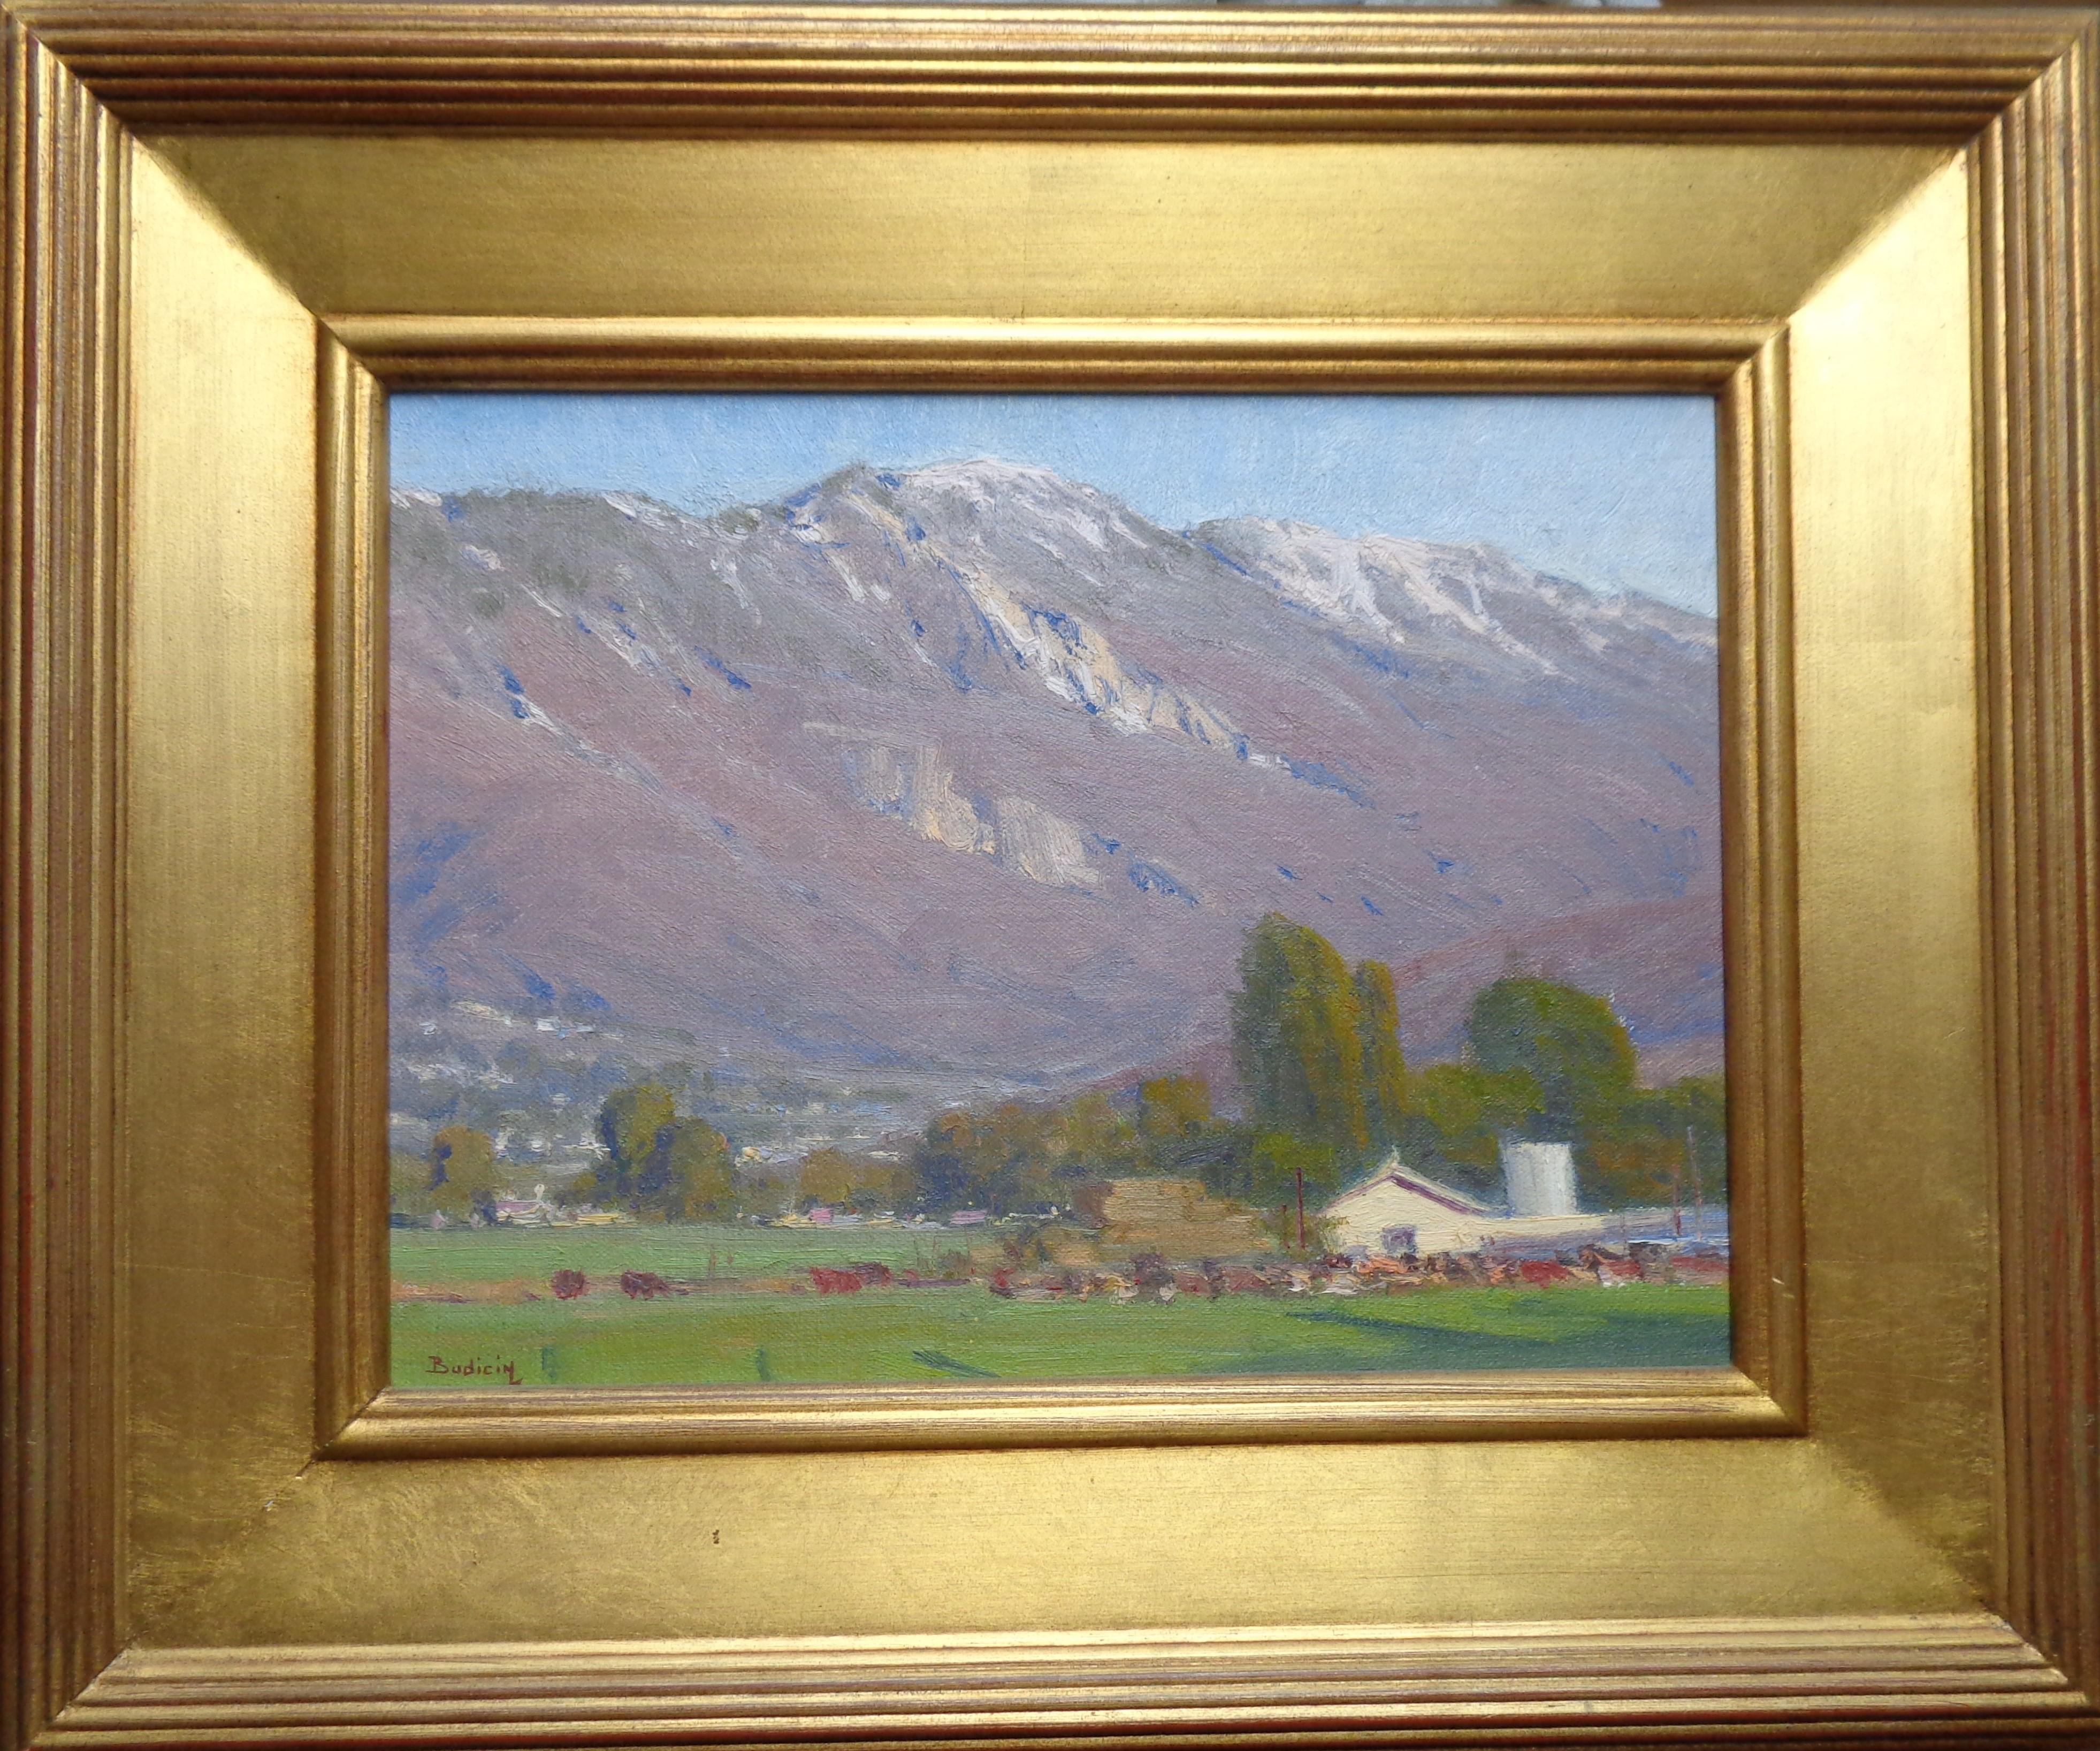 Sunday Afternoon
oil/canvas laid to panel
image 9 x 12
January 2003 Live Oak Canyon Rod

Born in Rovigno, D'Istria, Italy, 1944, John moved to California at the age of 11, where he went to college, and continues to live today.   After several years